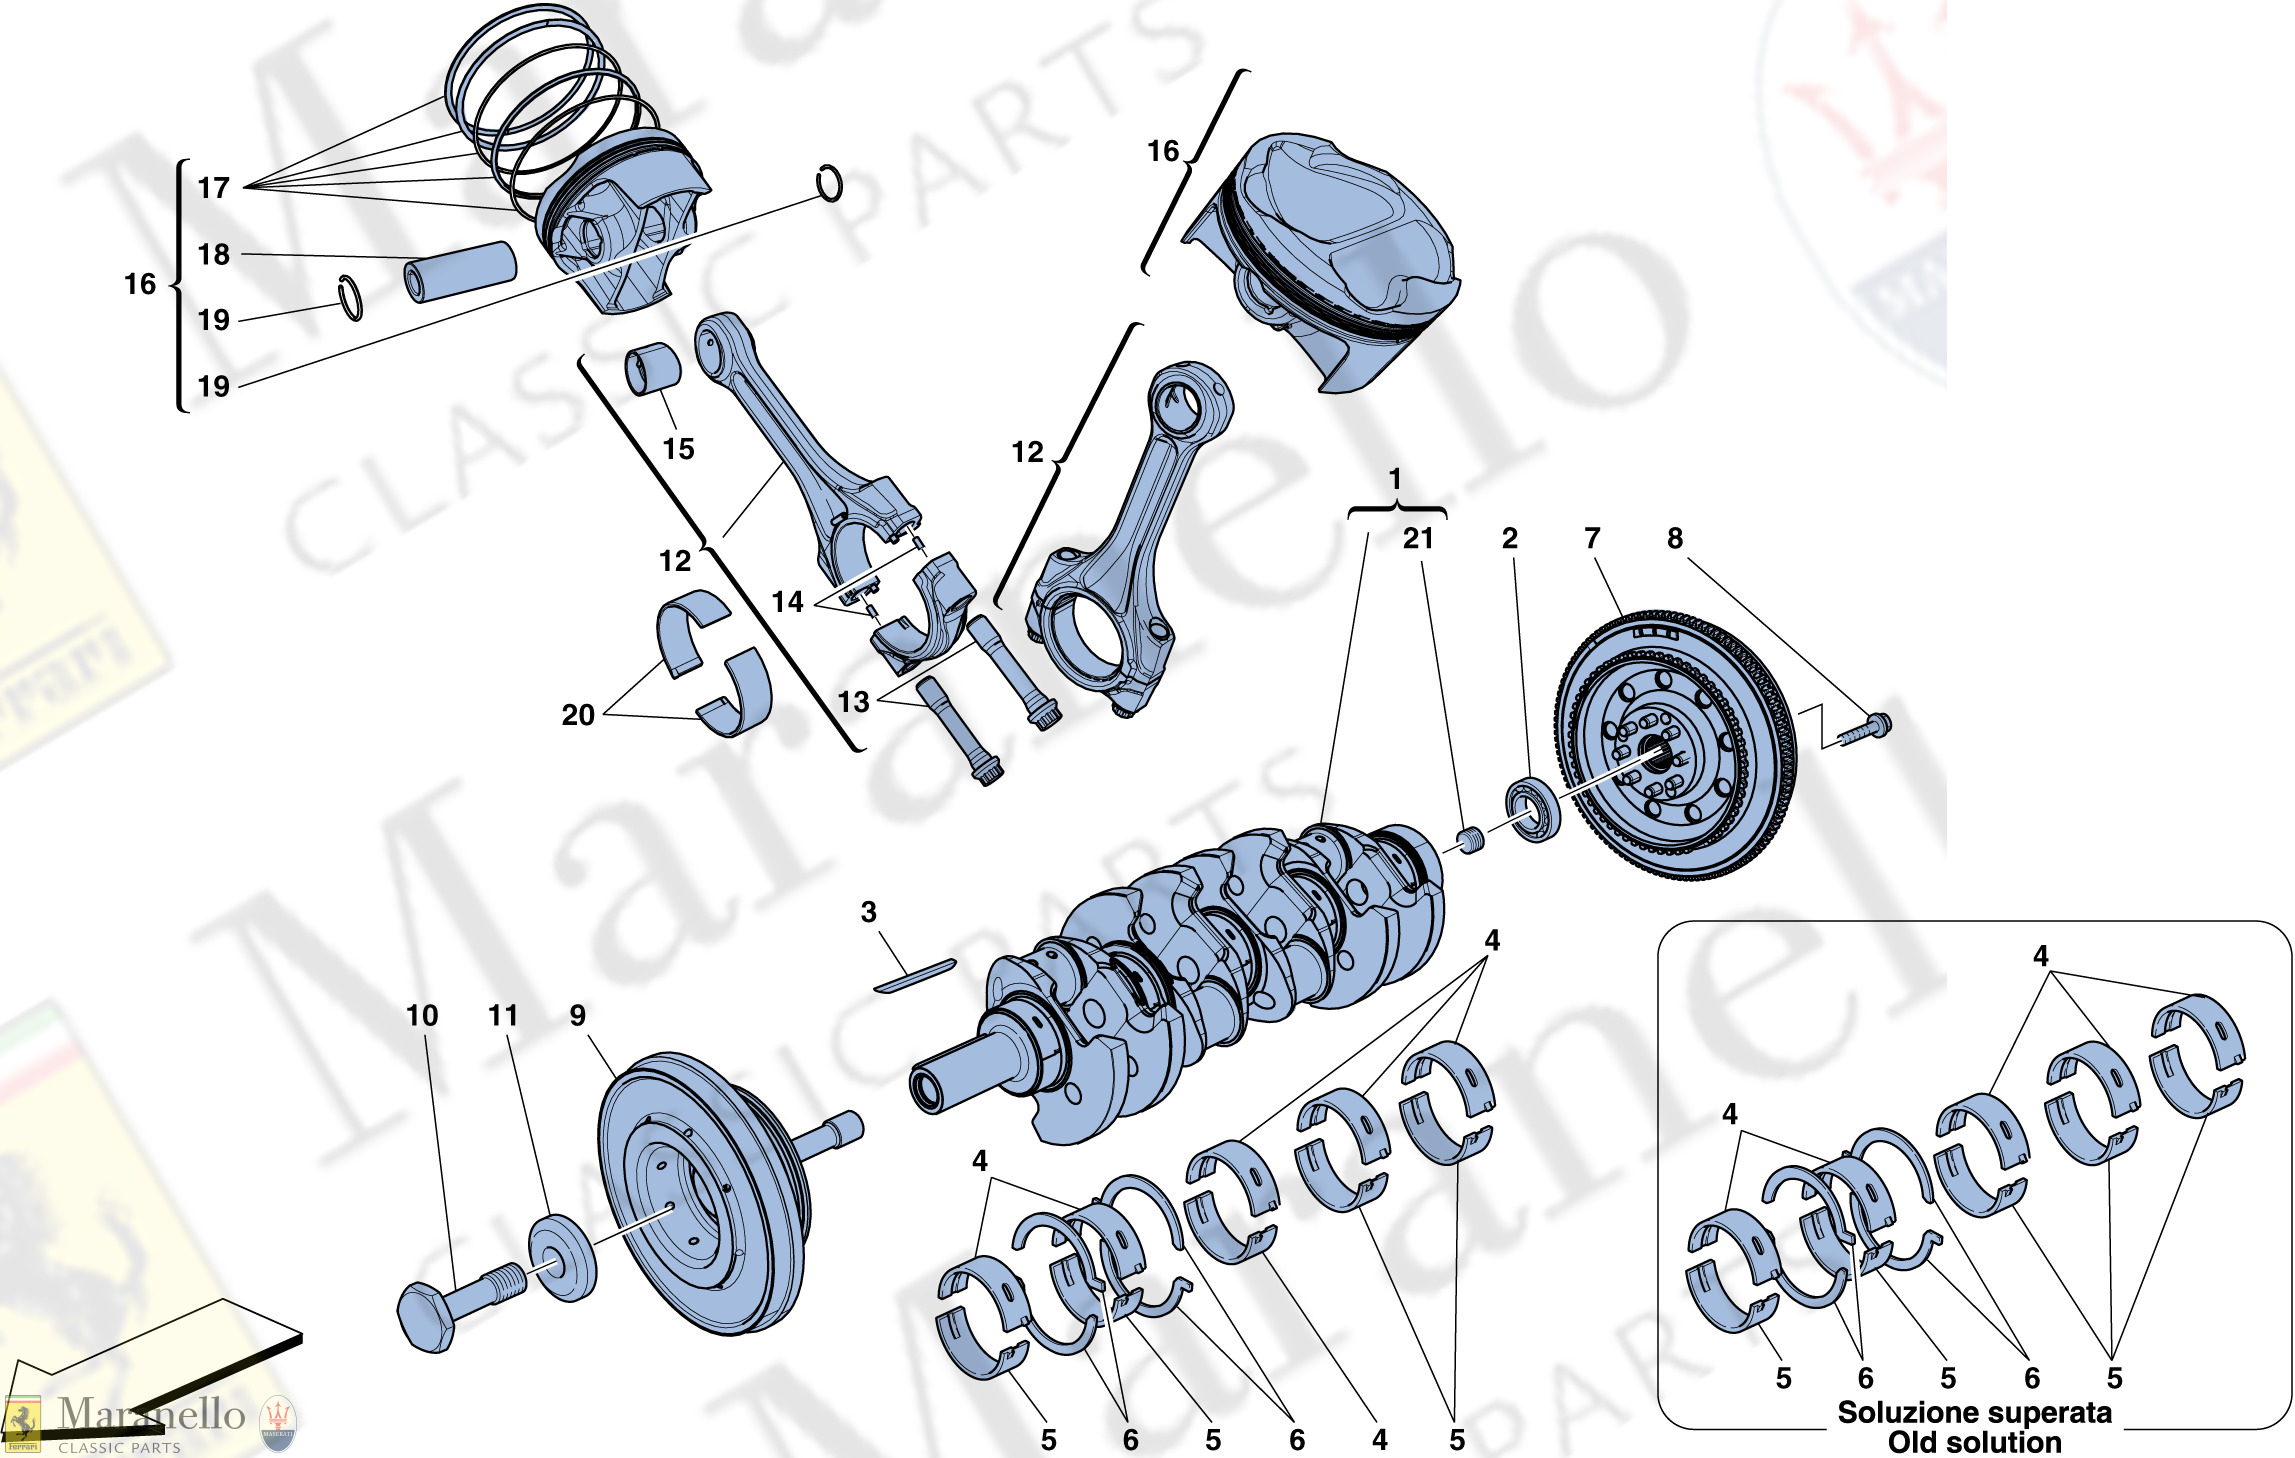 002 - Crankshaft - Connecting Rods And Pistons